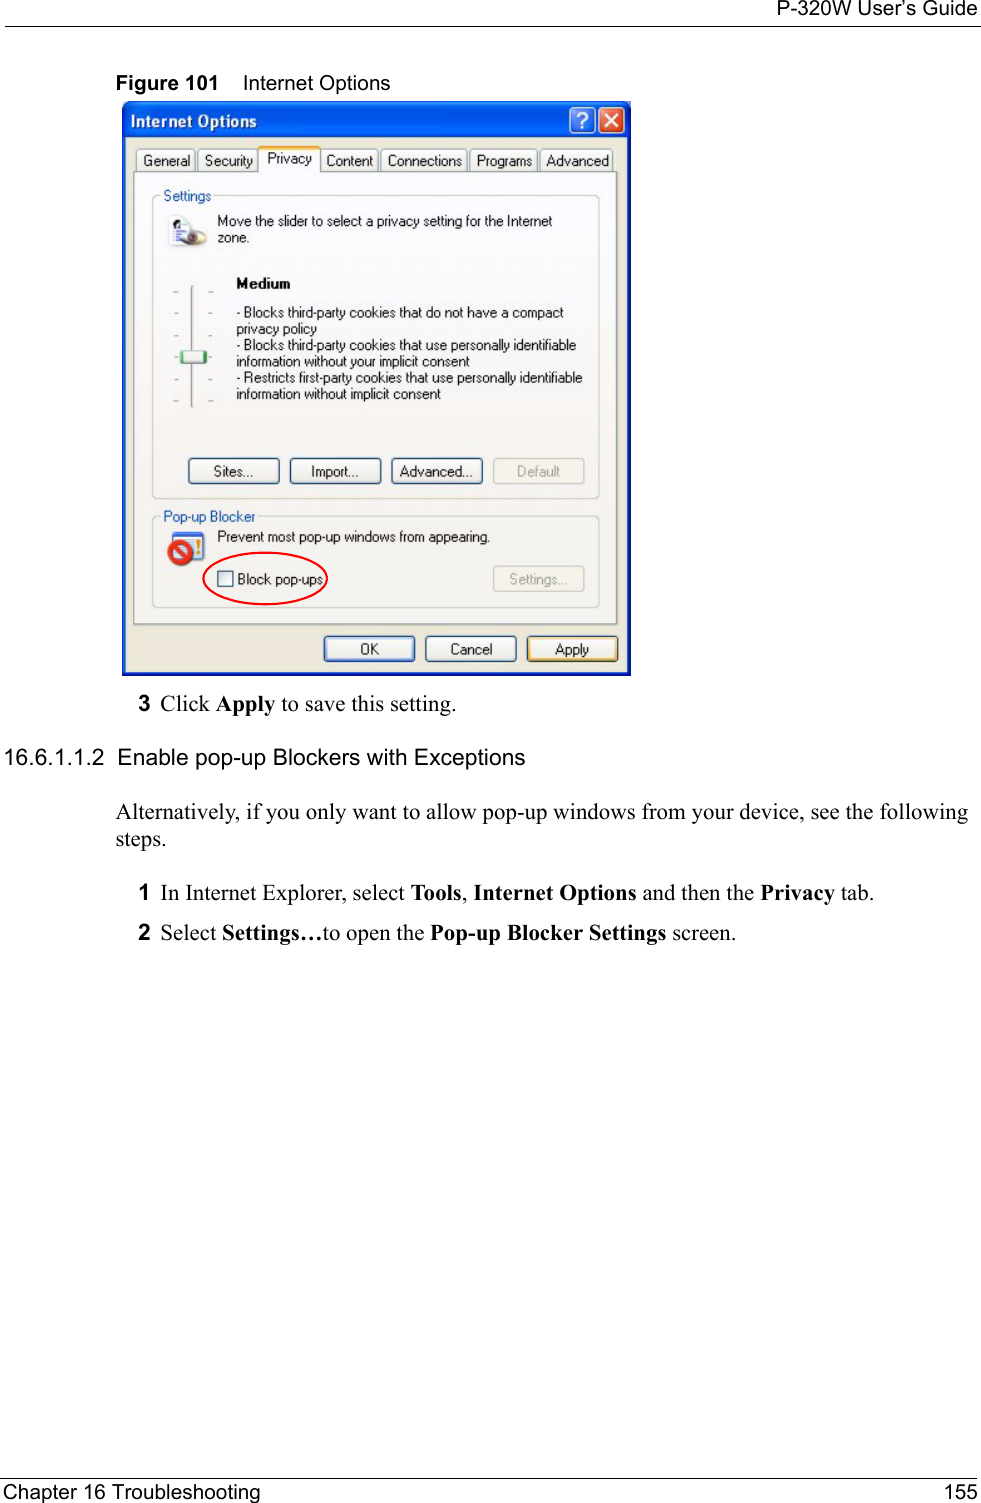 P-320W User’s GuideChapter 16 Troubleshooting 155Figure 101    Internet Options3Click Apply to save this setting.16.6.1.1.2  Enable pop-up Blockers with ExceptionsAlternatively, if you only want to allow pop-up windows from your device, see the following steps.1In Internet Explorer, select Tools, Internet Options and then the Privacy tab. 2Select Settings…to open the Pop-up Blocker Settings screen.